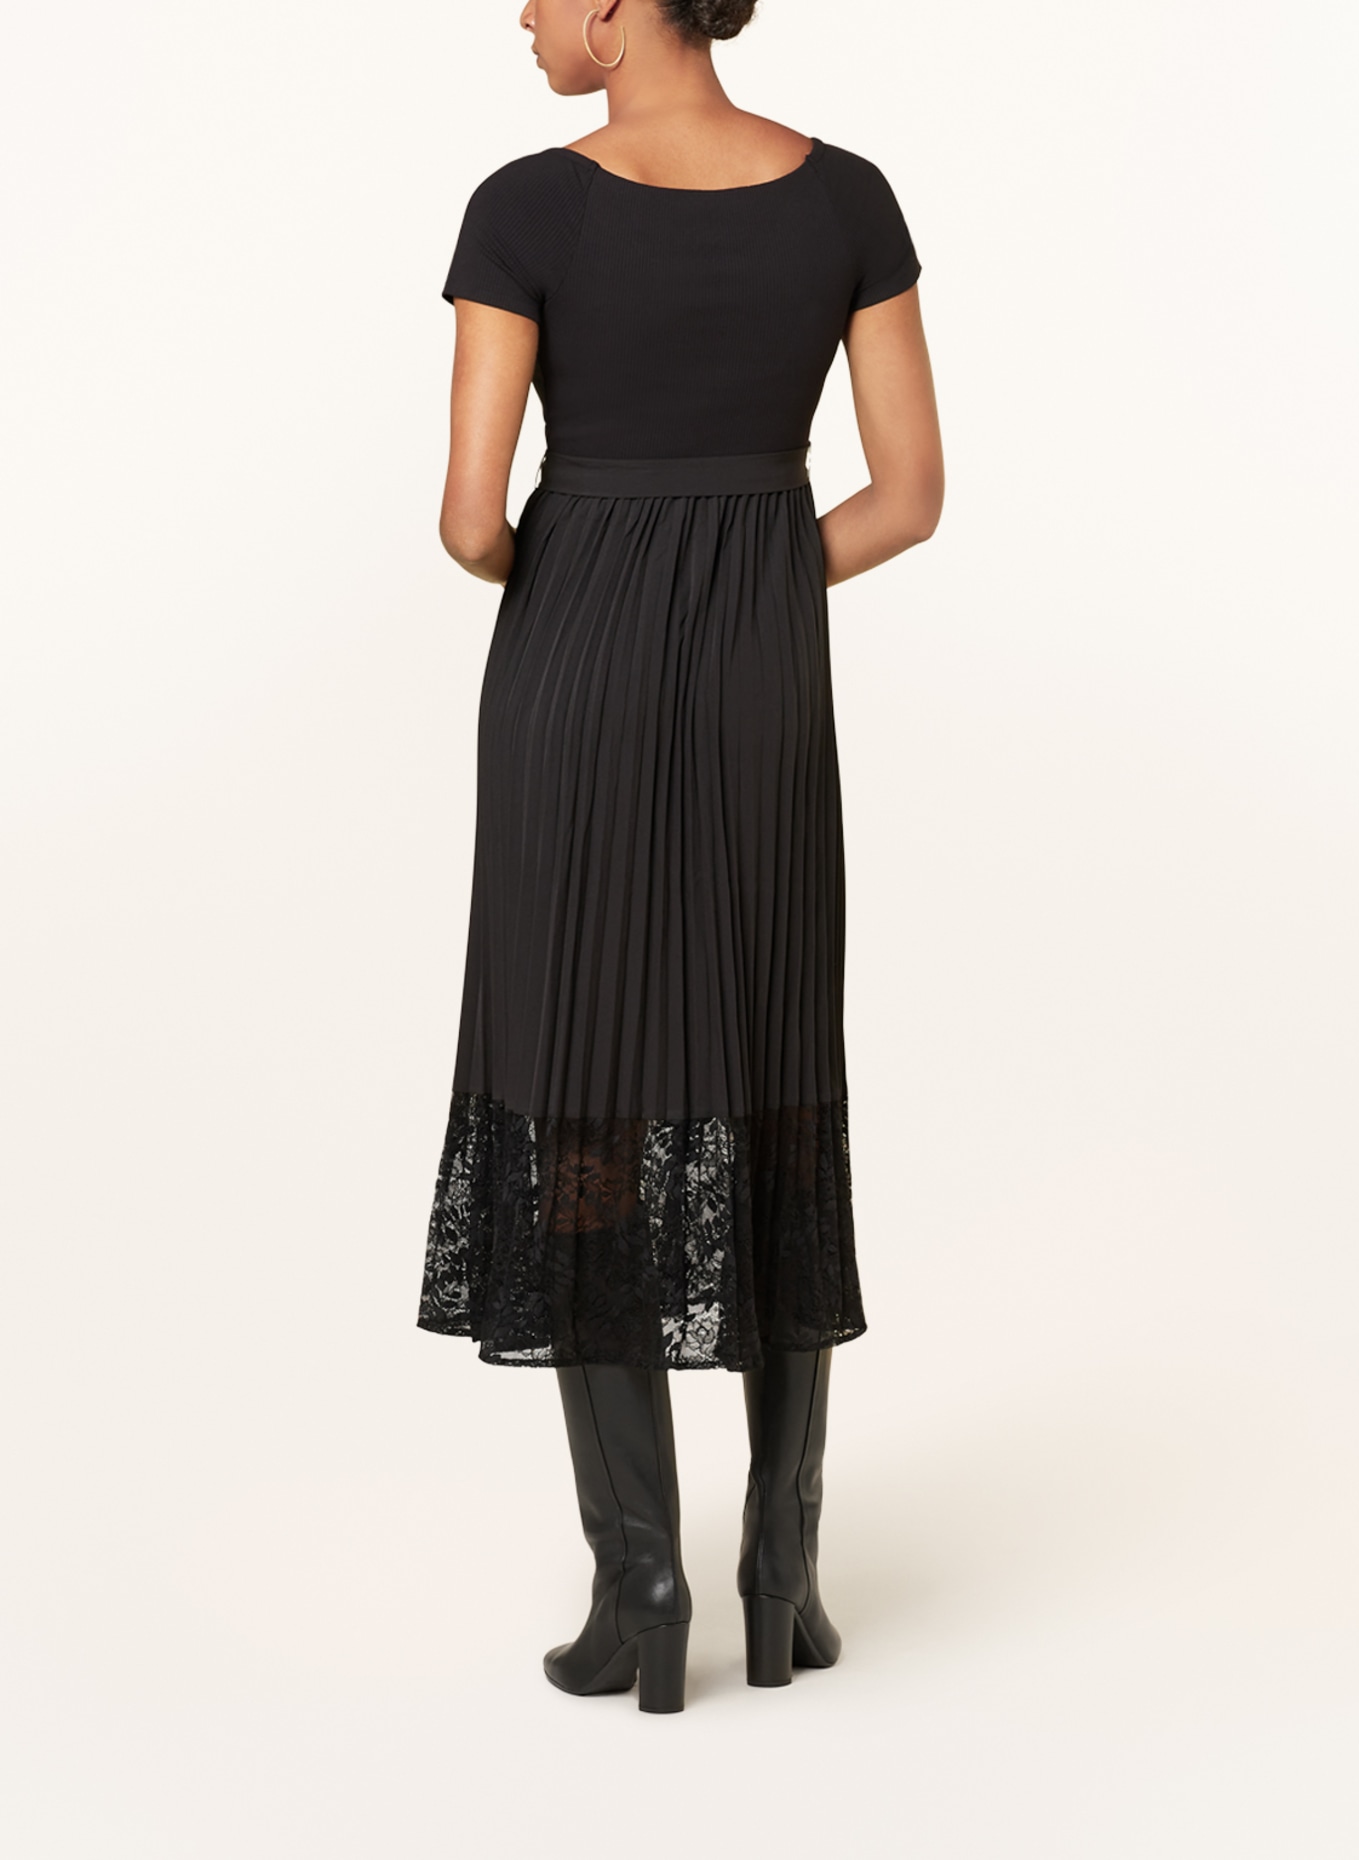 GUESS Dress TIANA in mixed materials with lace, Color: BLACK (Image 3)